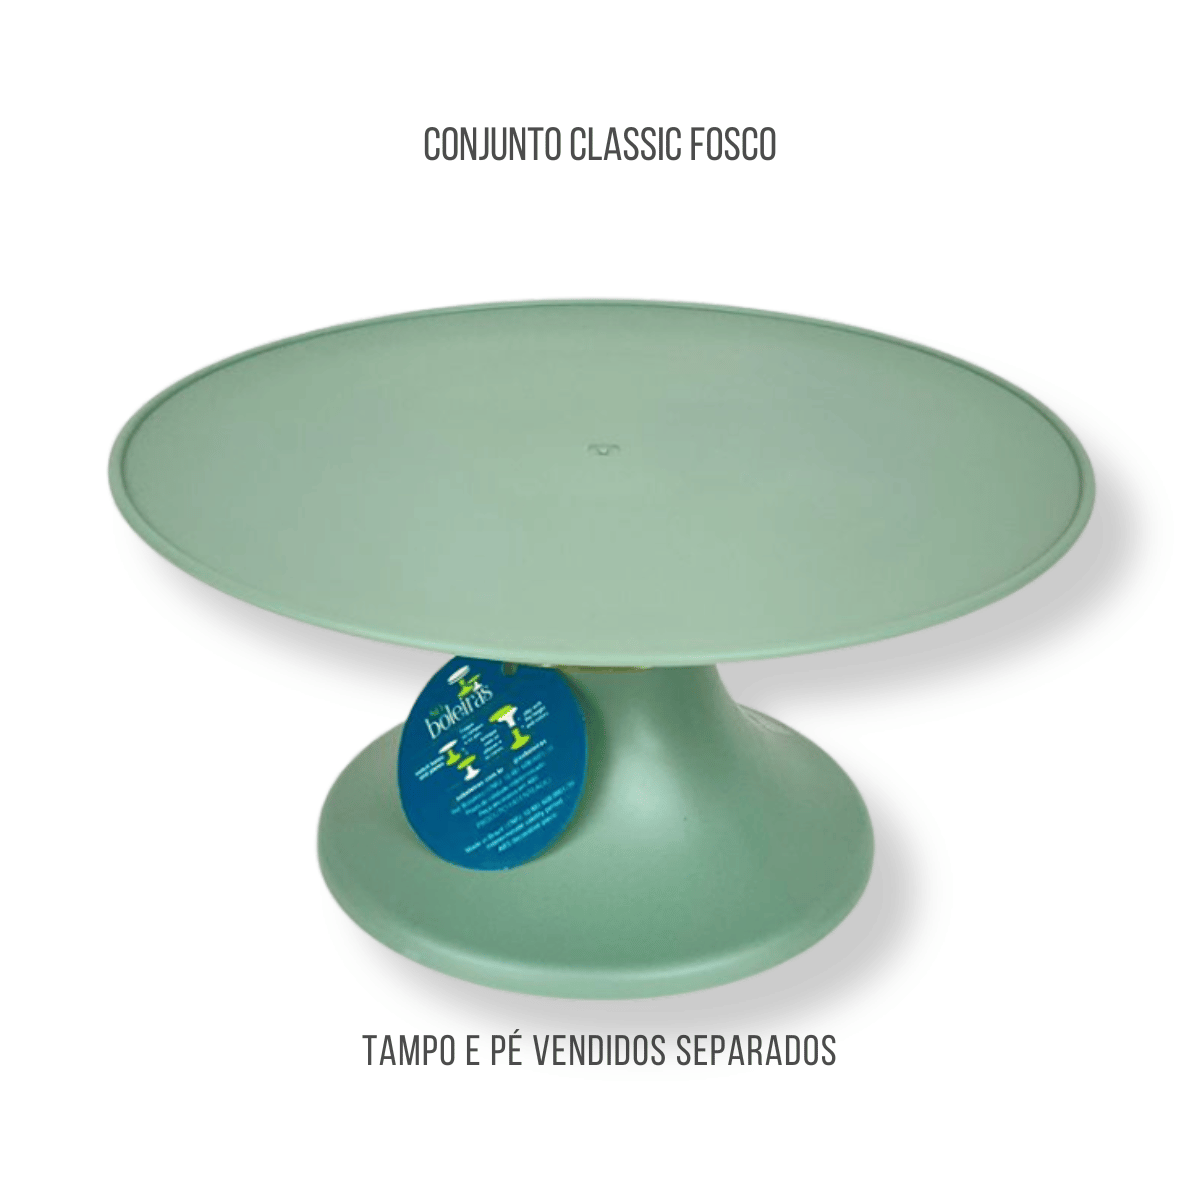 Mint green classic cake stand 4.5inx9in/220mmx135mm